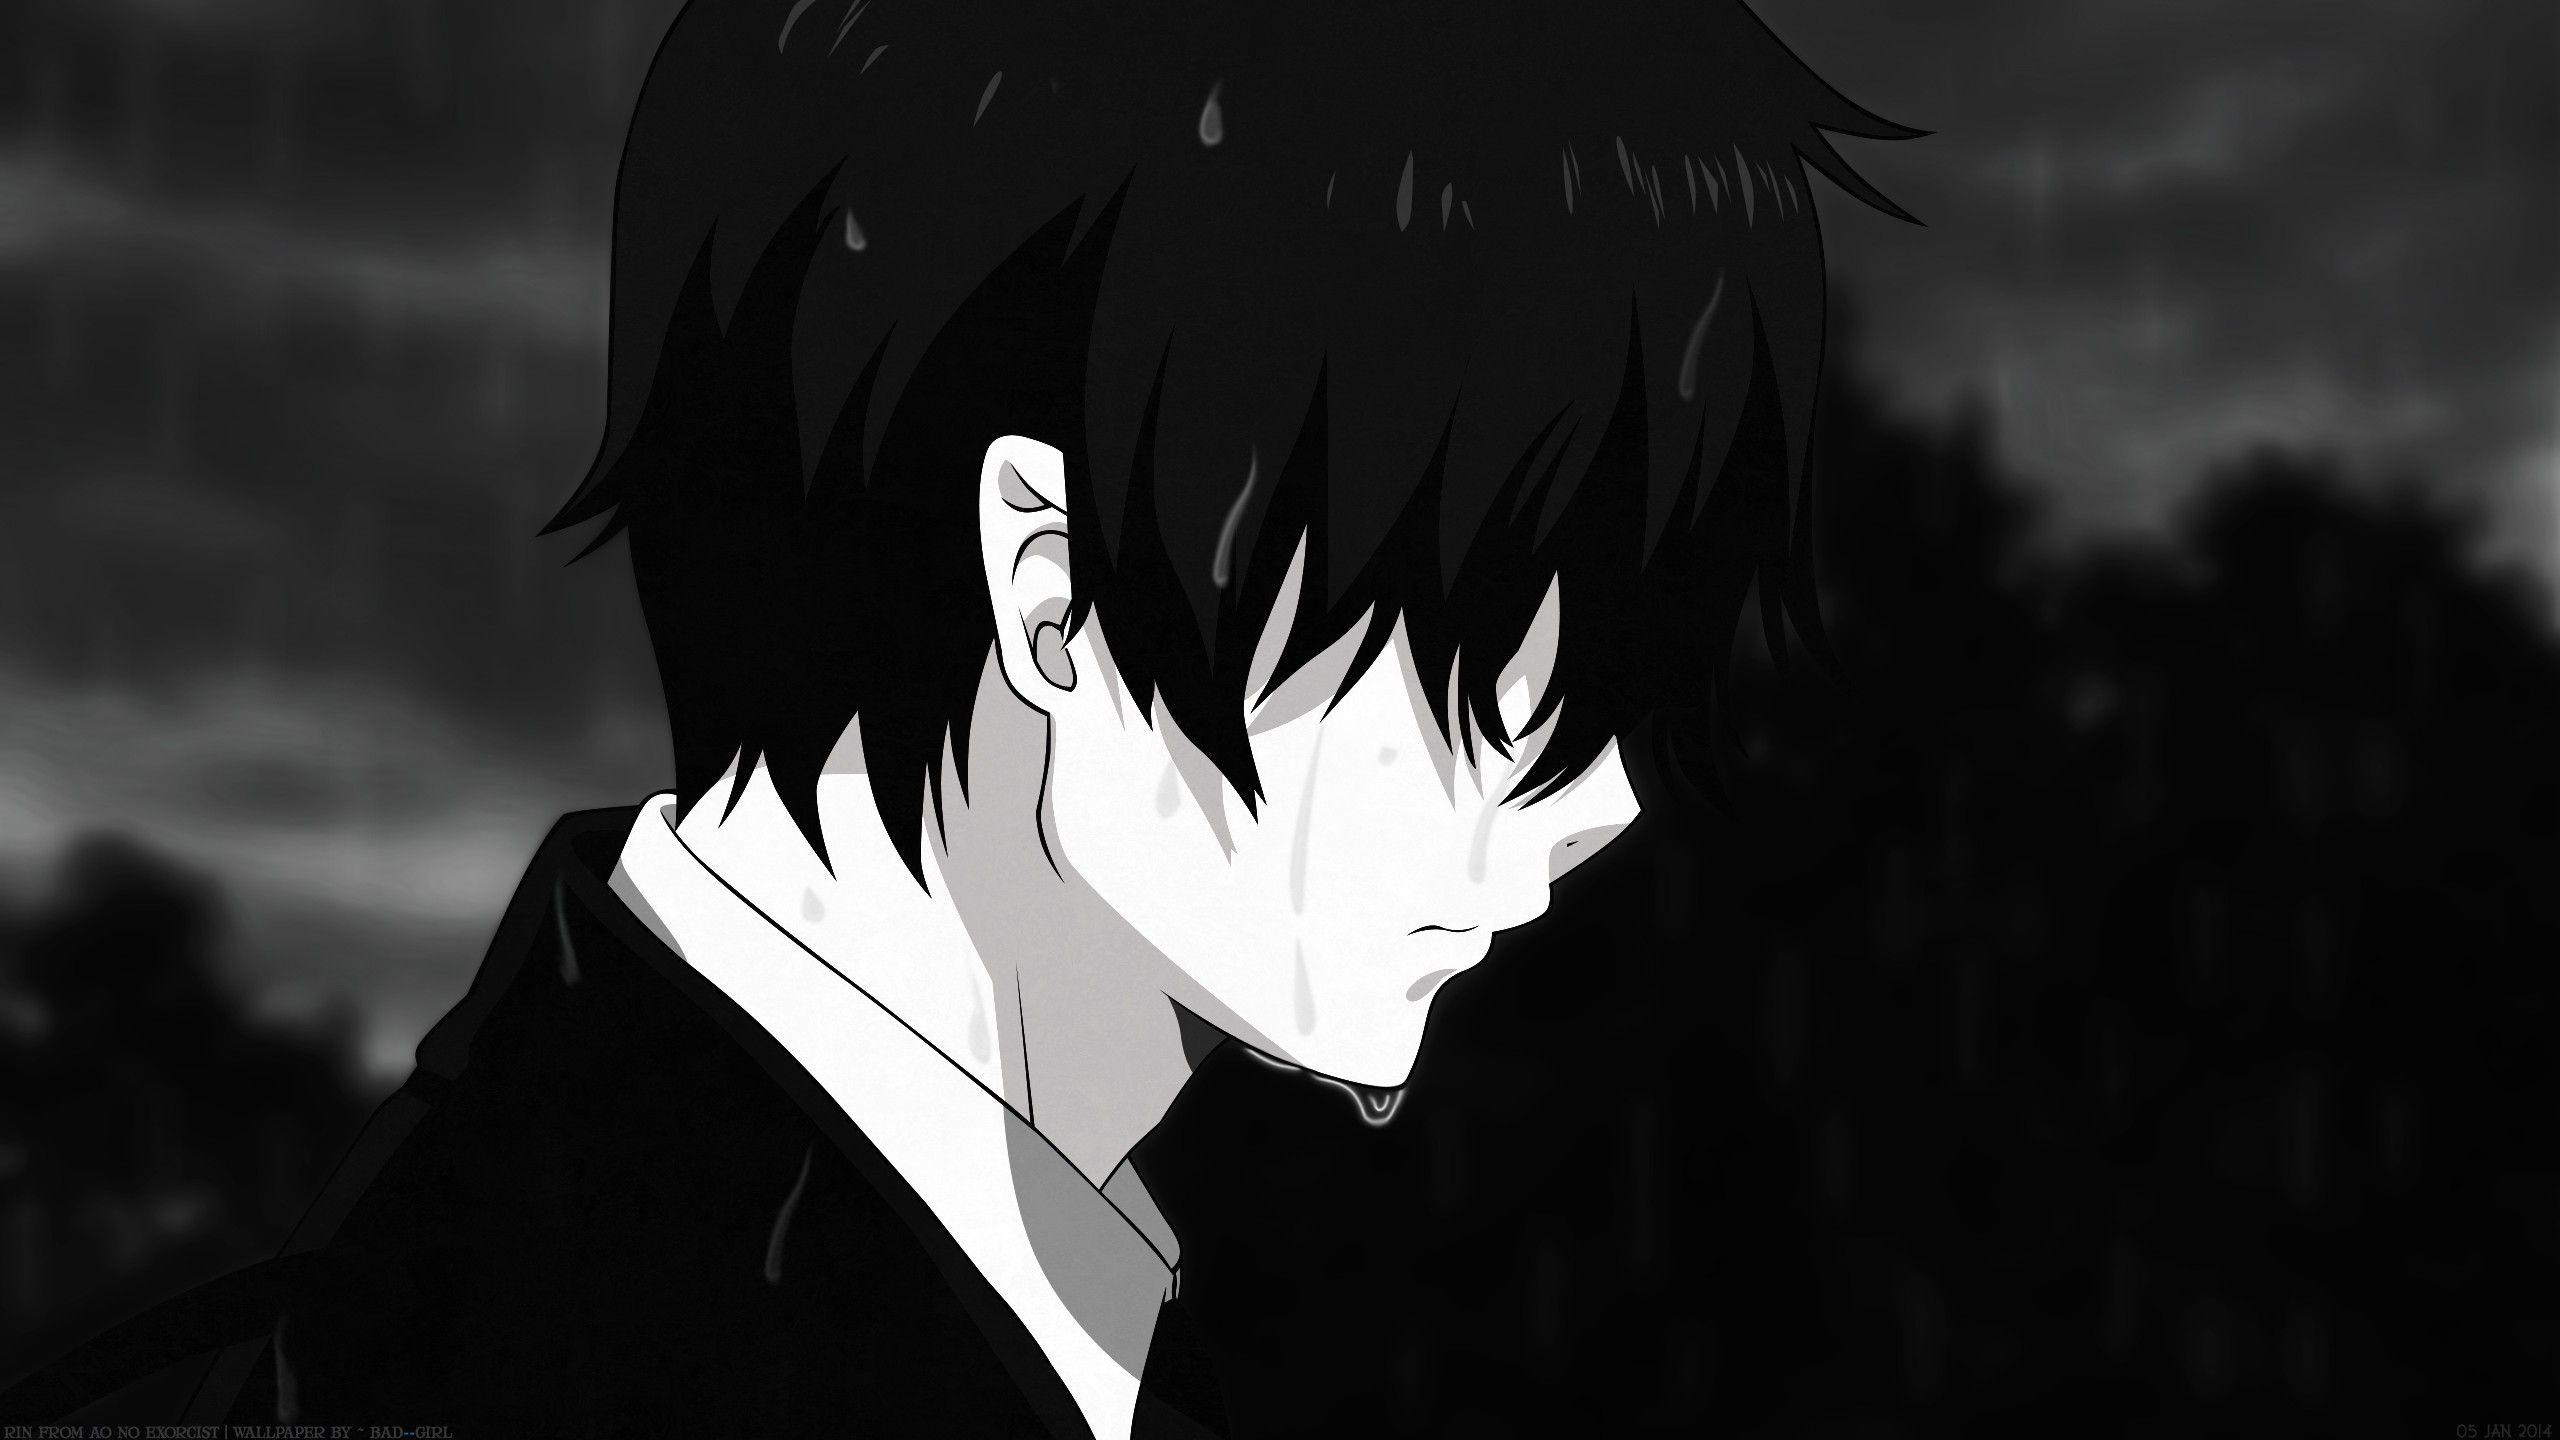 Depressed Anime Character Wallpapers - Wallpaper Cave